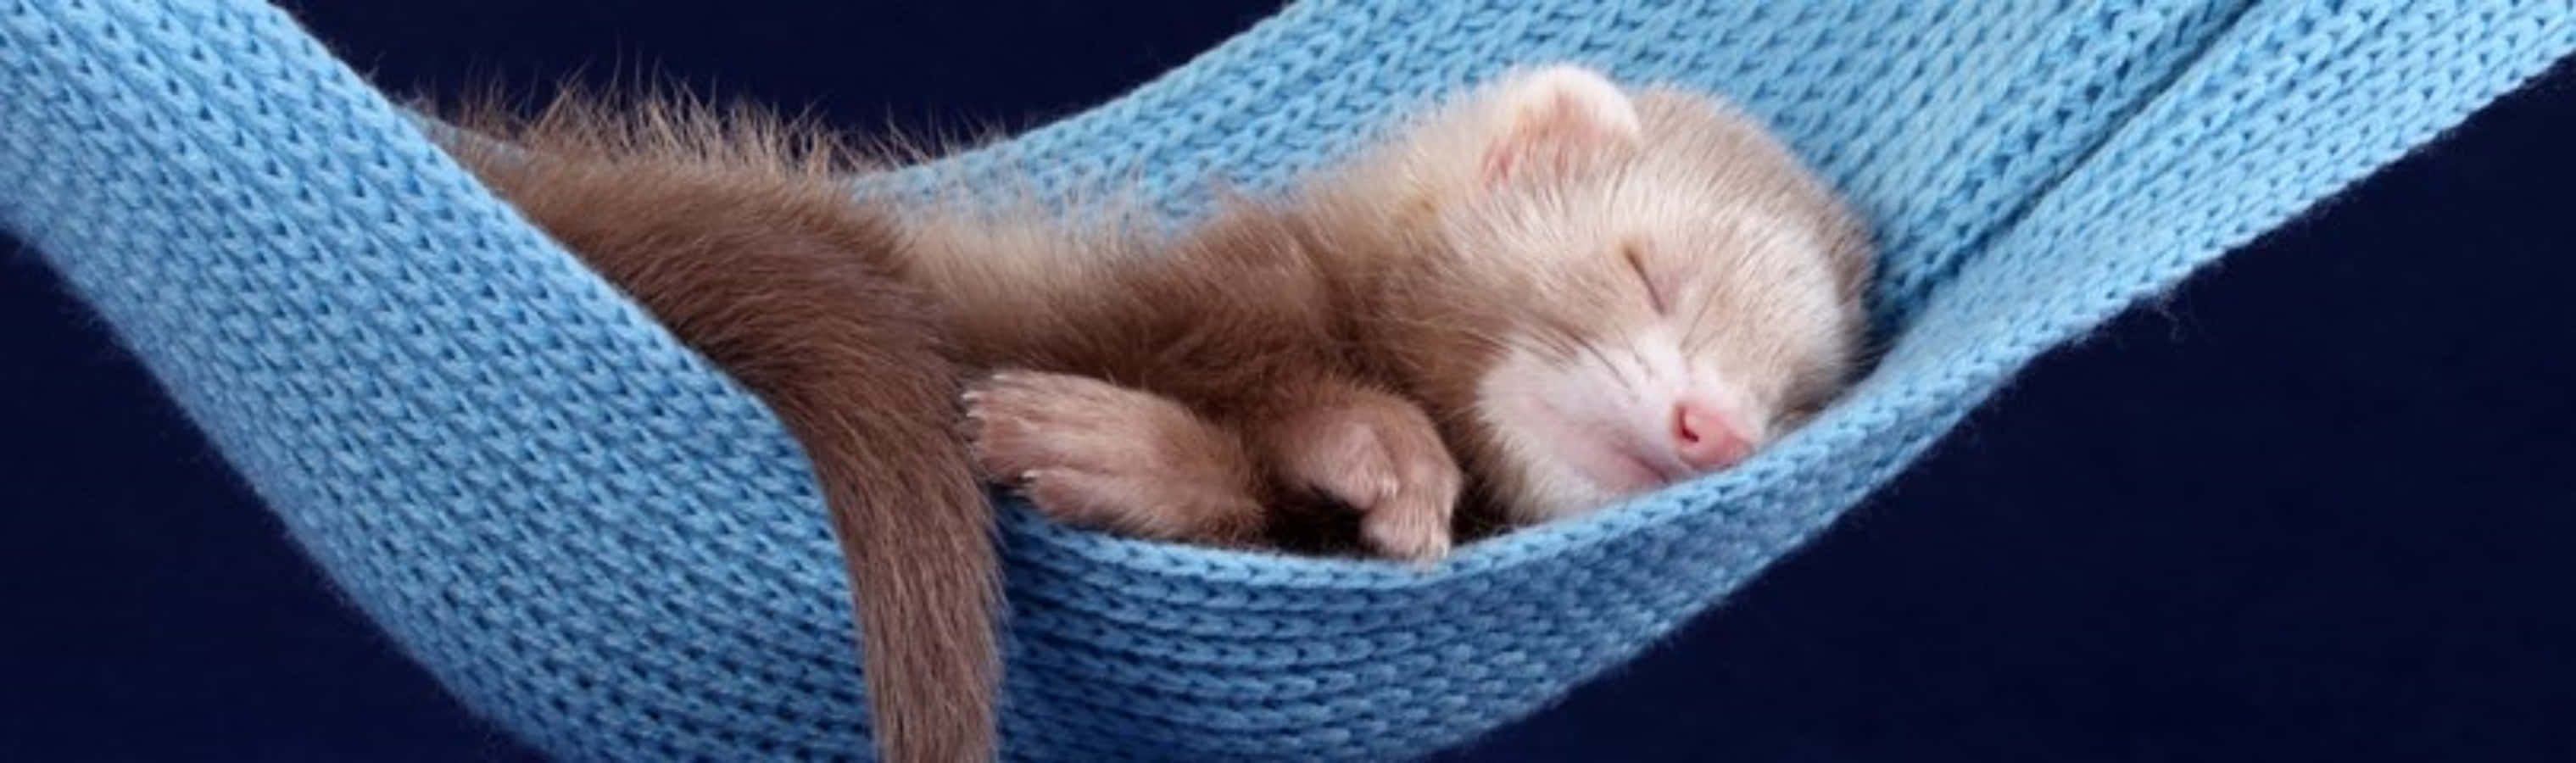 Cute Ferret Sleeping Pictures